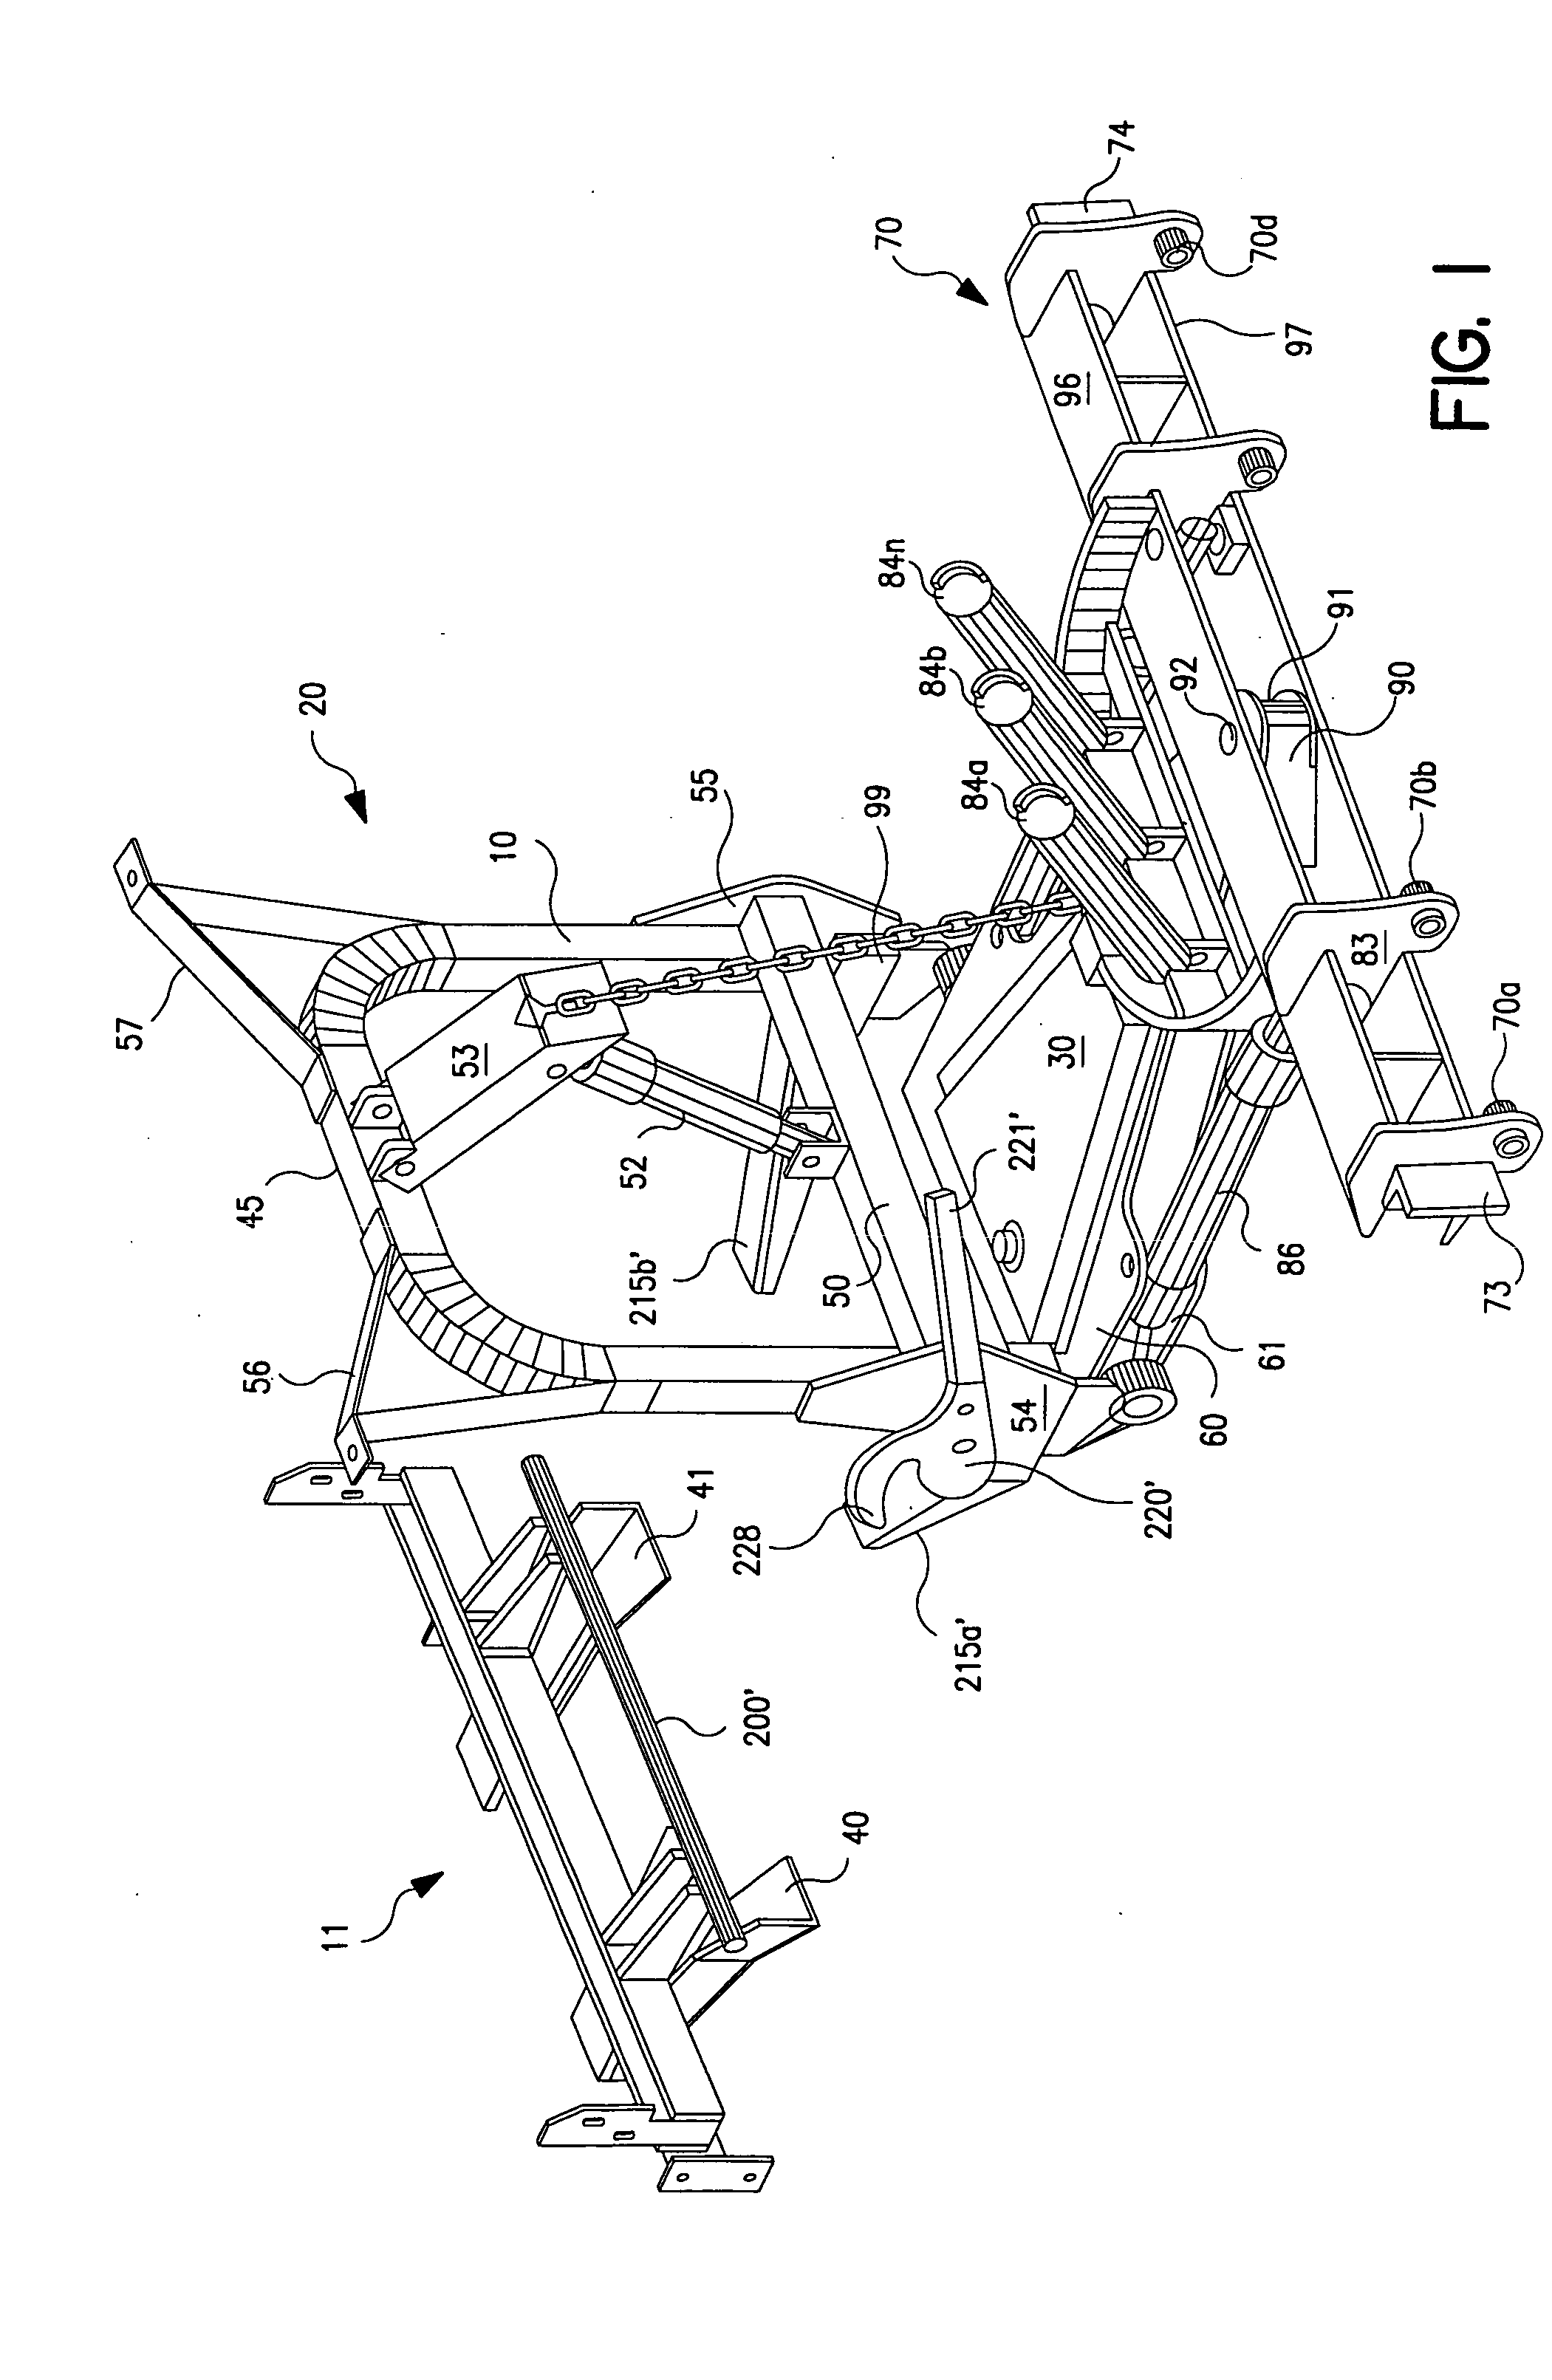 Jack for a working implement and method